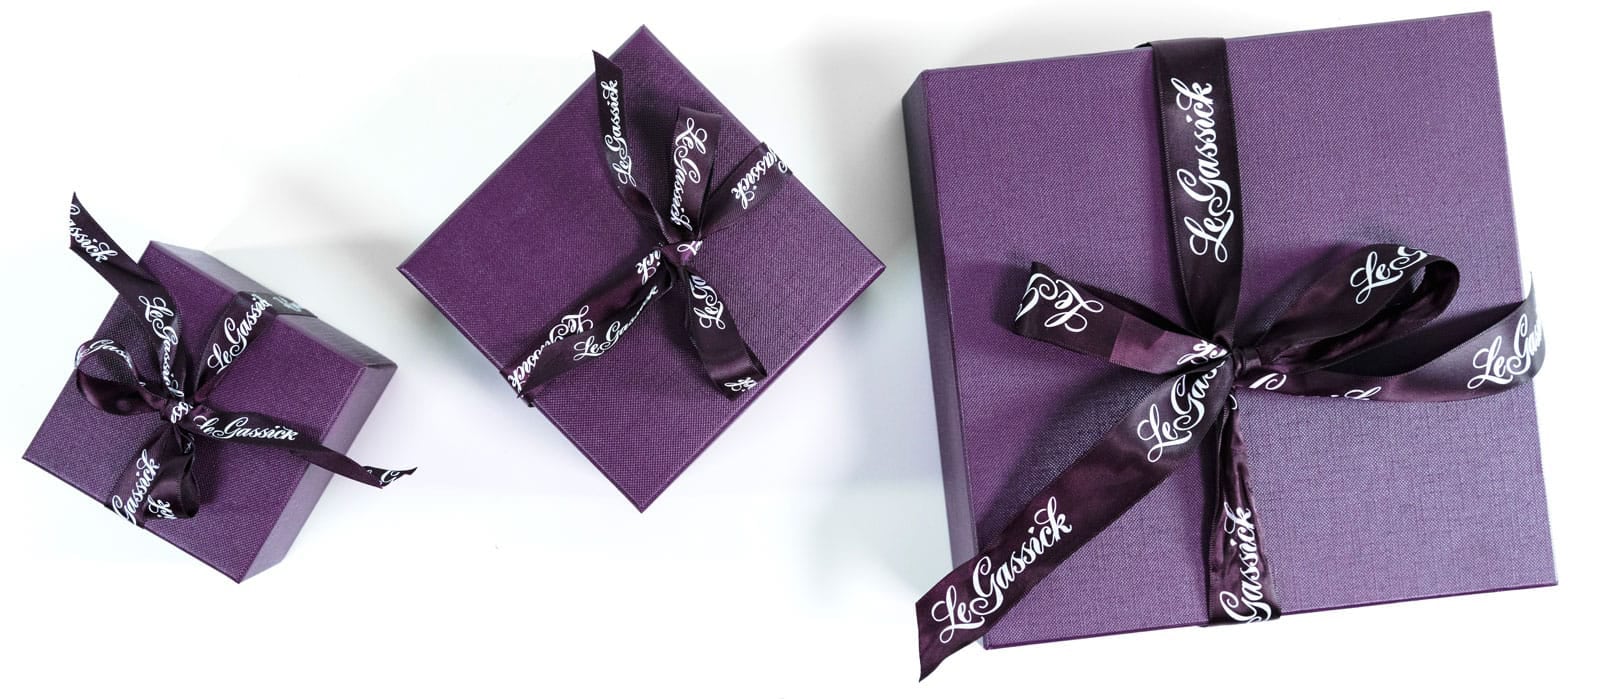 Purple jewellery boxes wrapped with ribbon from LeGassick Diamonds and Jewellery Gold Coast, Australia.